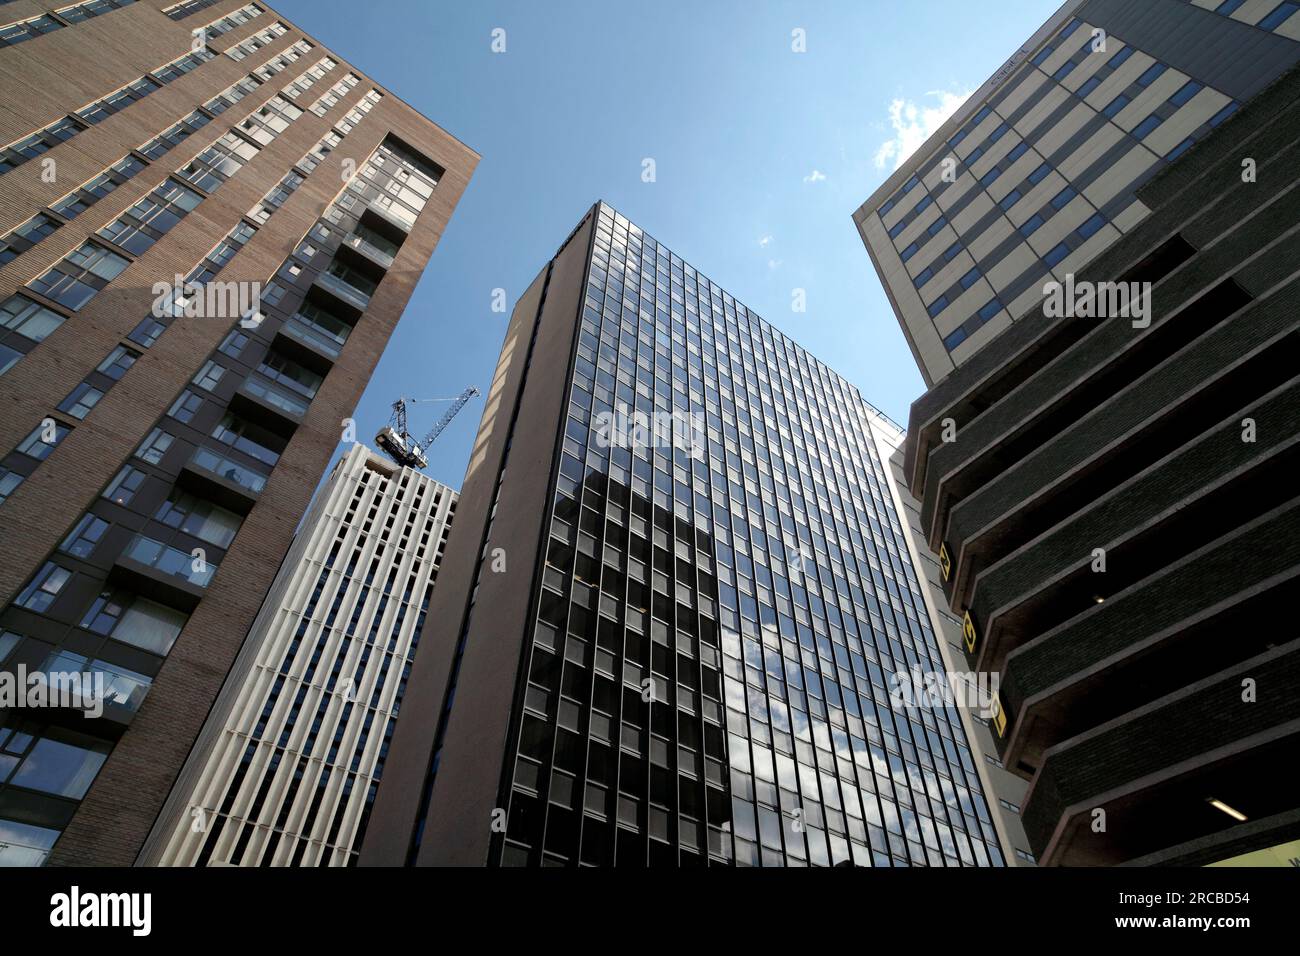 Tall buildings in Birmingham's business district. (The view from Newton Street looking towards Dale End.) Stock Photo